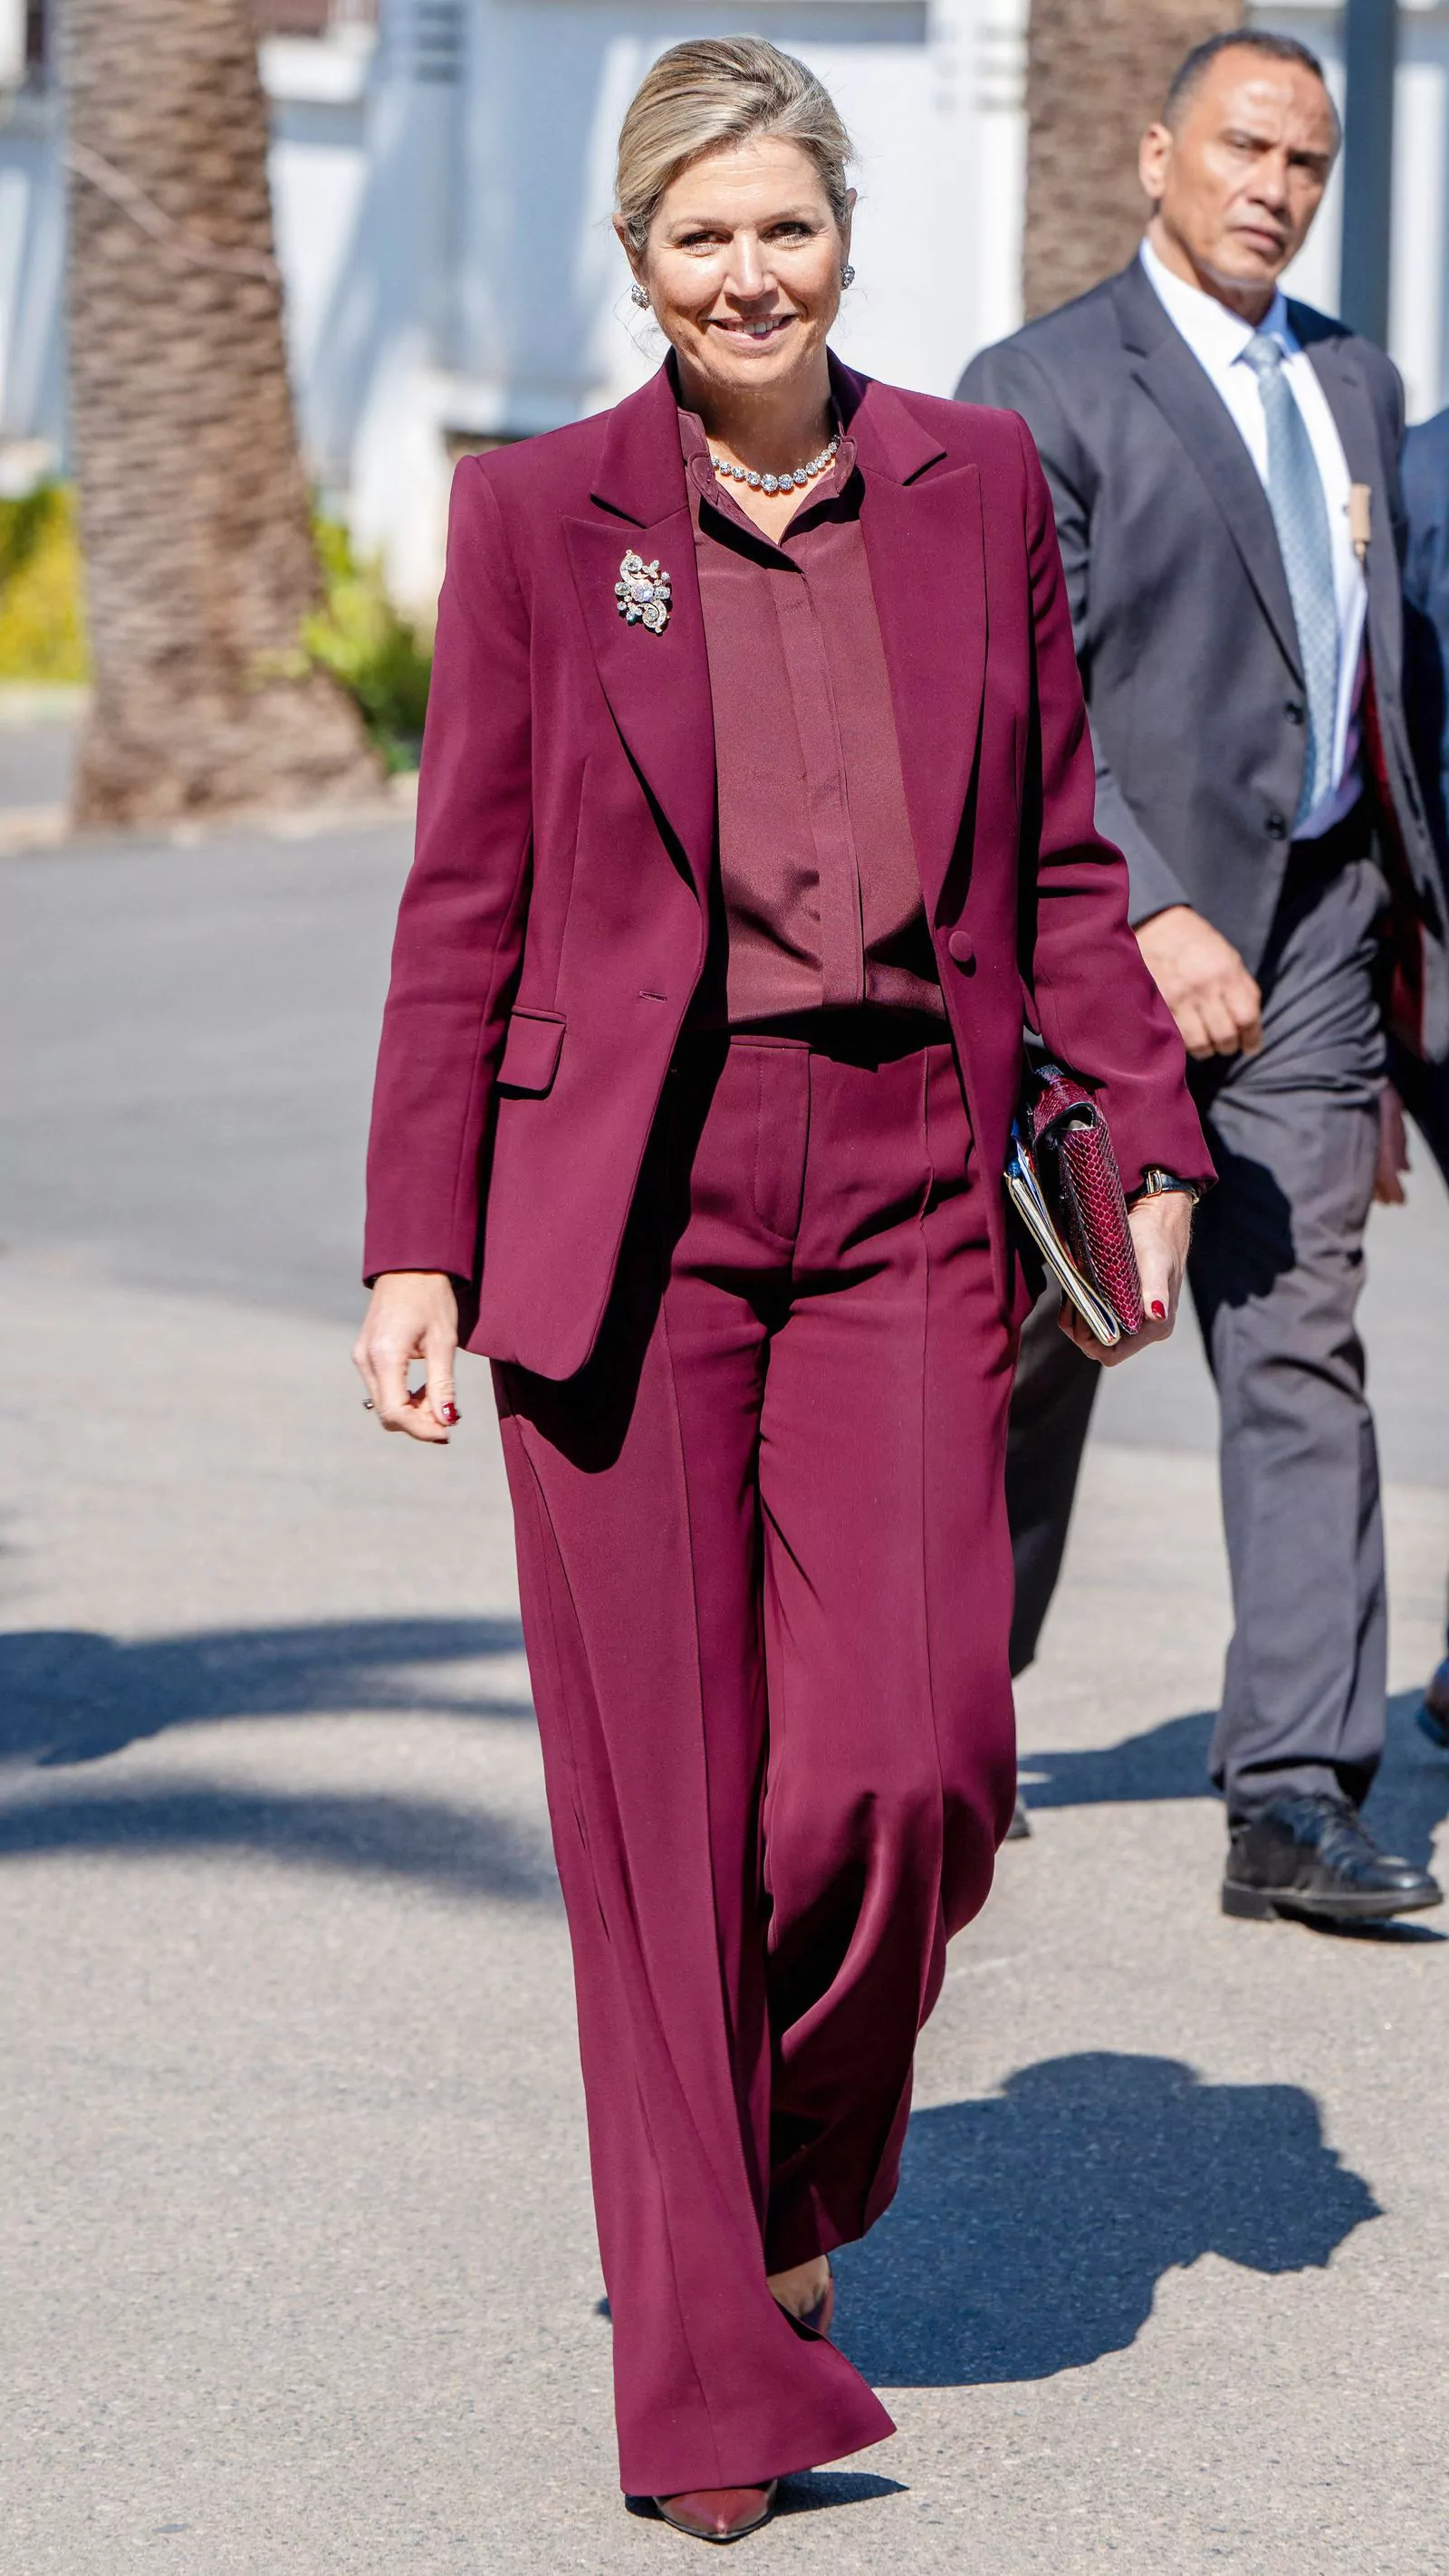 Queen Maxima during her visit to the Ministry of Economy and Finance in Rabat on the final day of a three-day visit to Morocco, March 22, 2023.